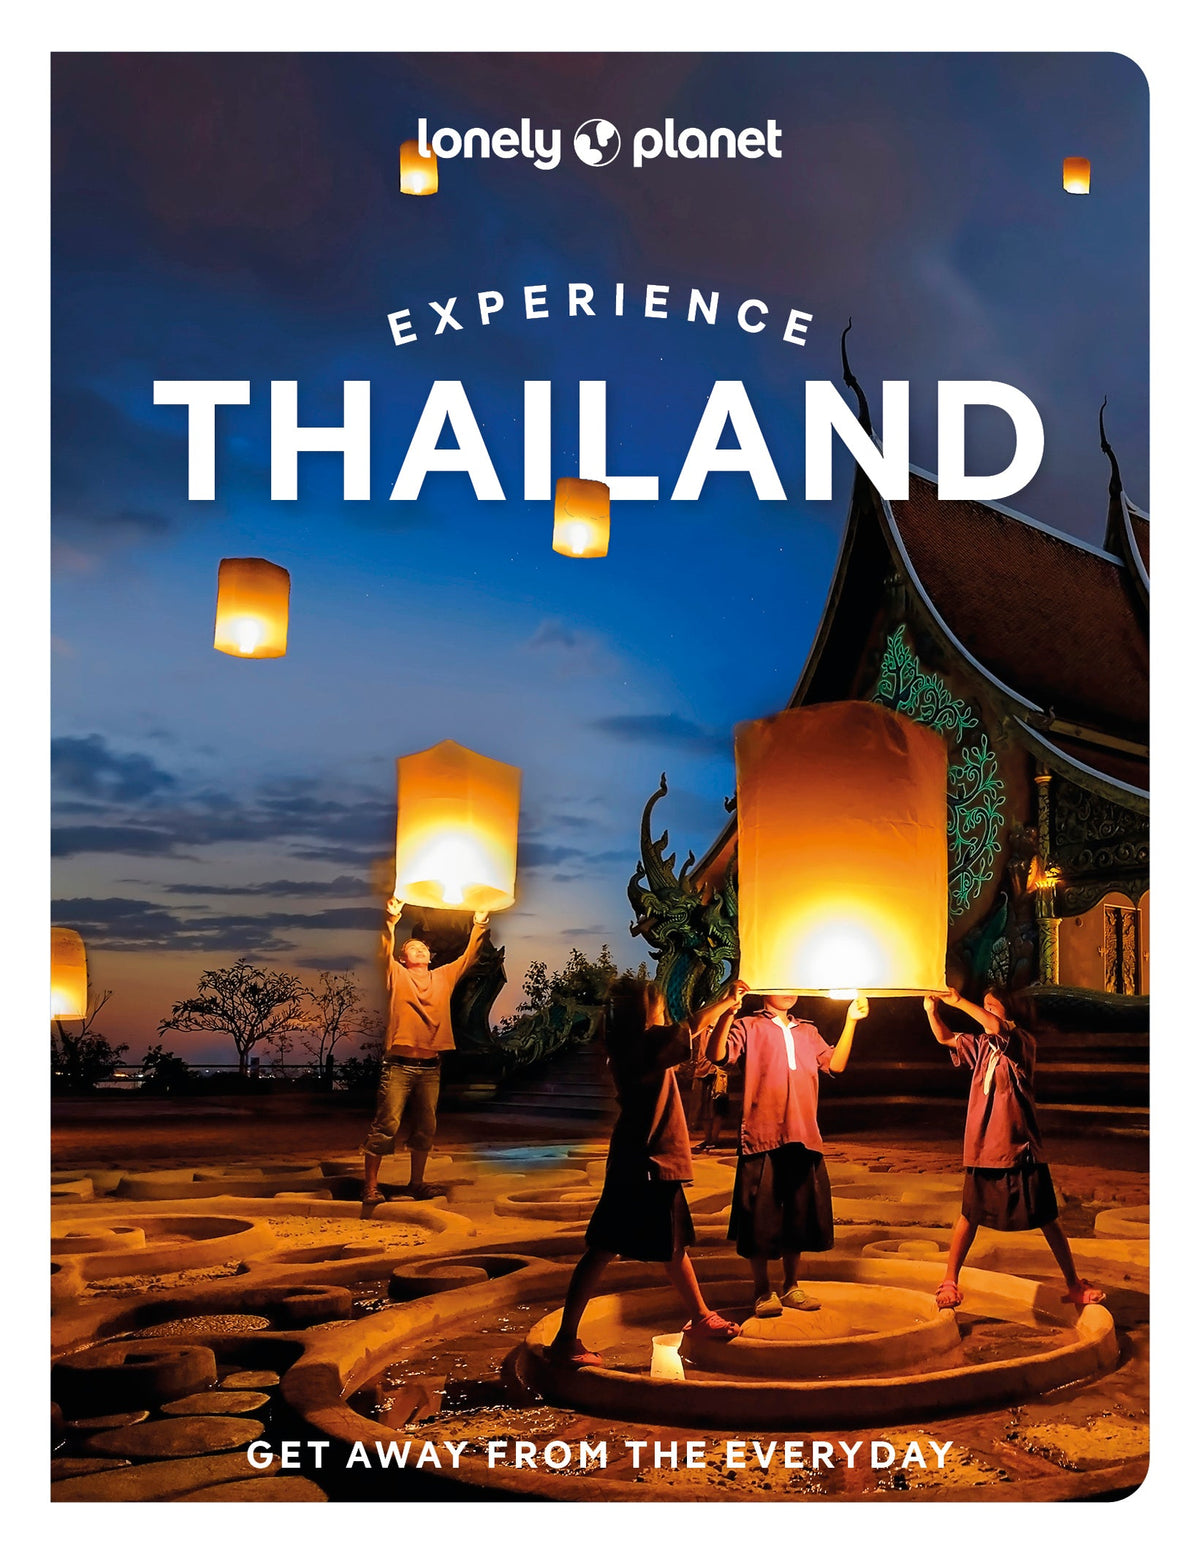 experience-thailand-lonely-planet-guide